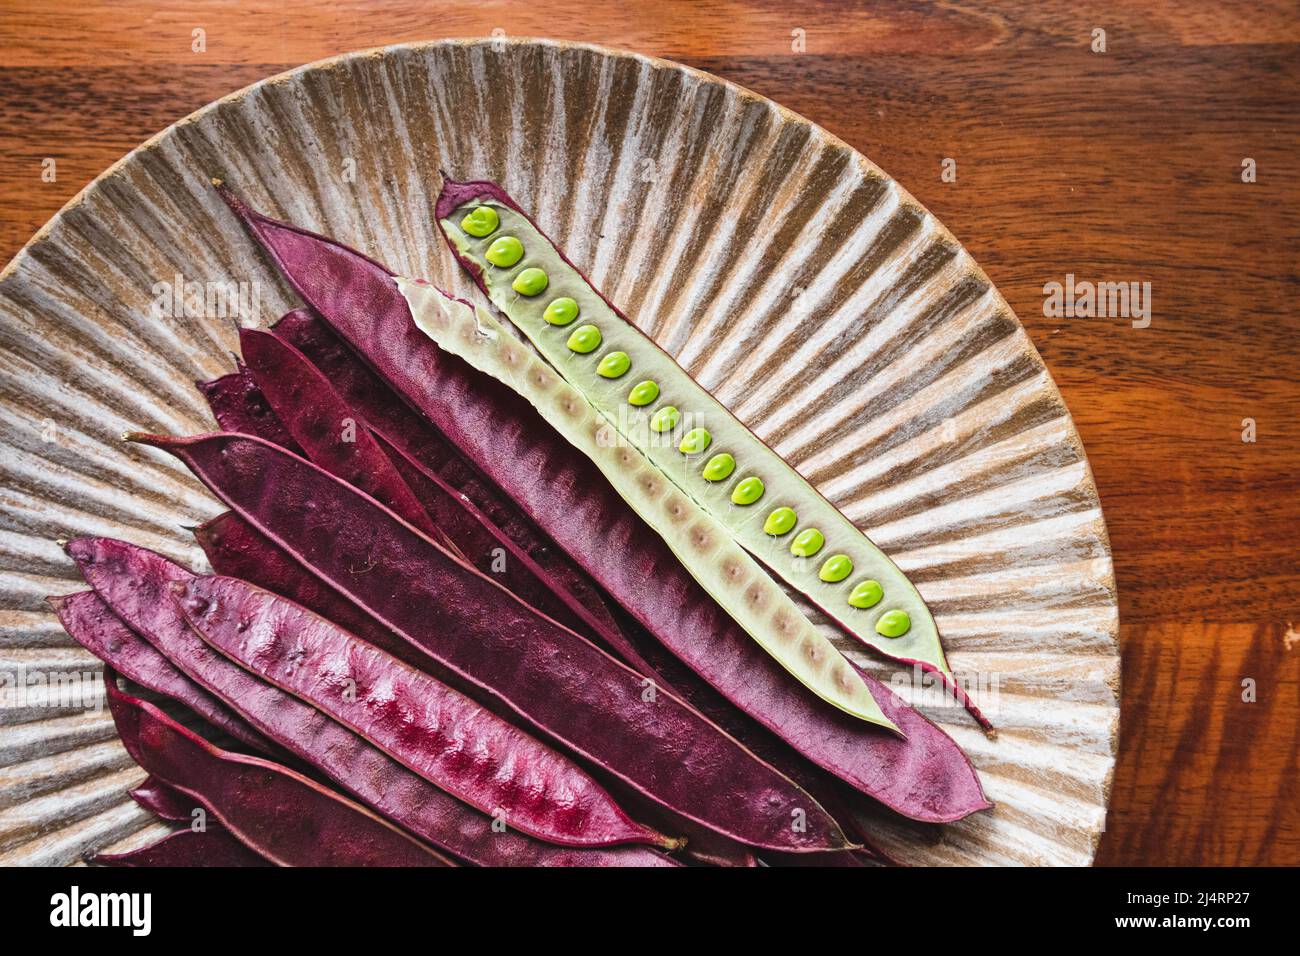 Pile of Guaje seed pods on a plate in Oaxaca, Mexico Stock Photo